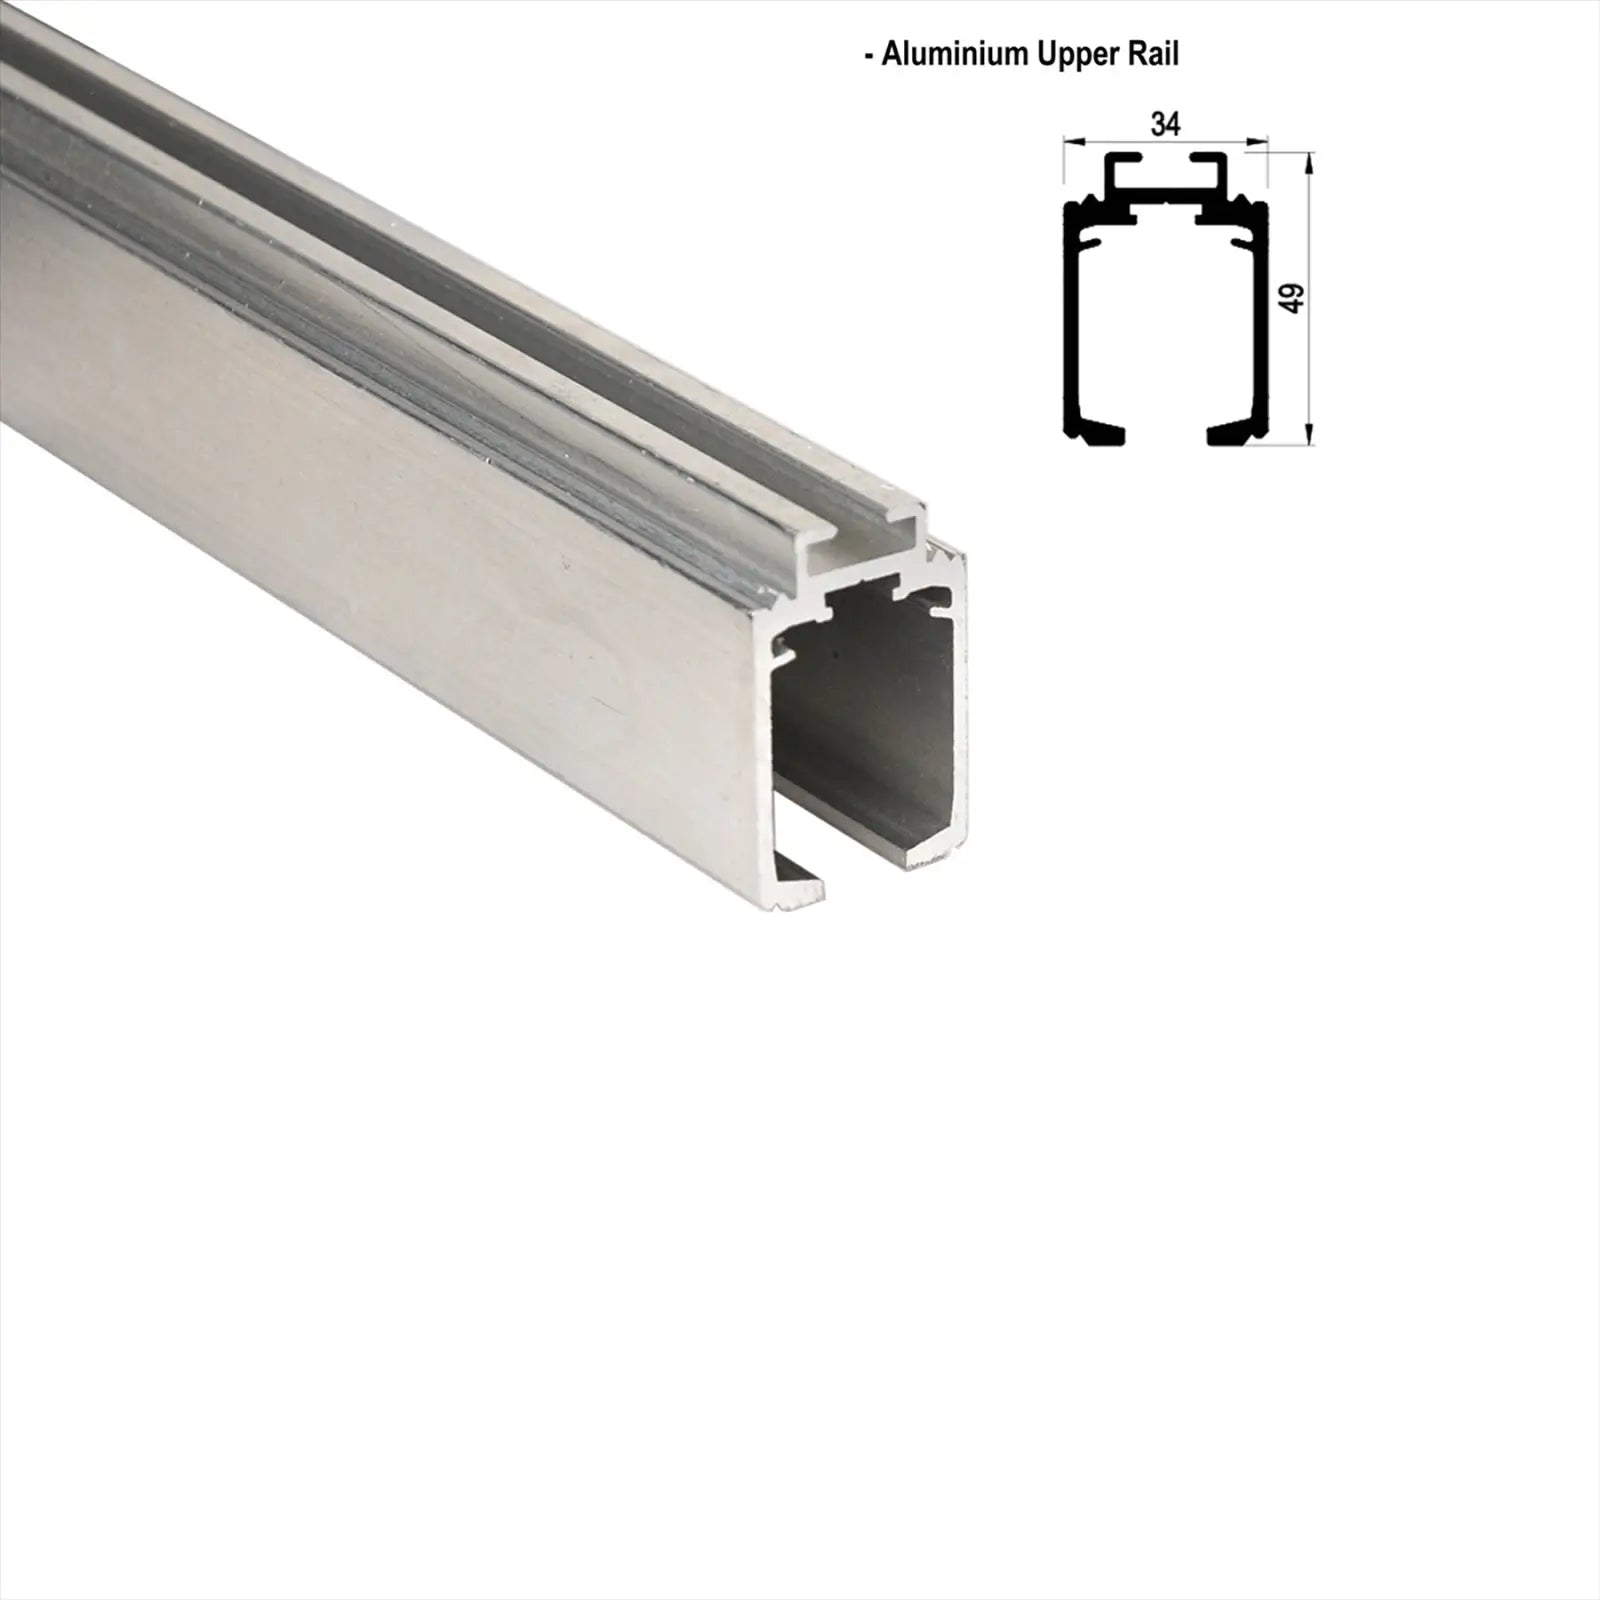 GS-Slide Top Hung Glass Sliding Door Kit - 3000mm Track - One Way Soft Close - Decor And Decor